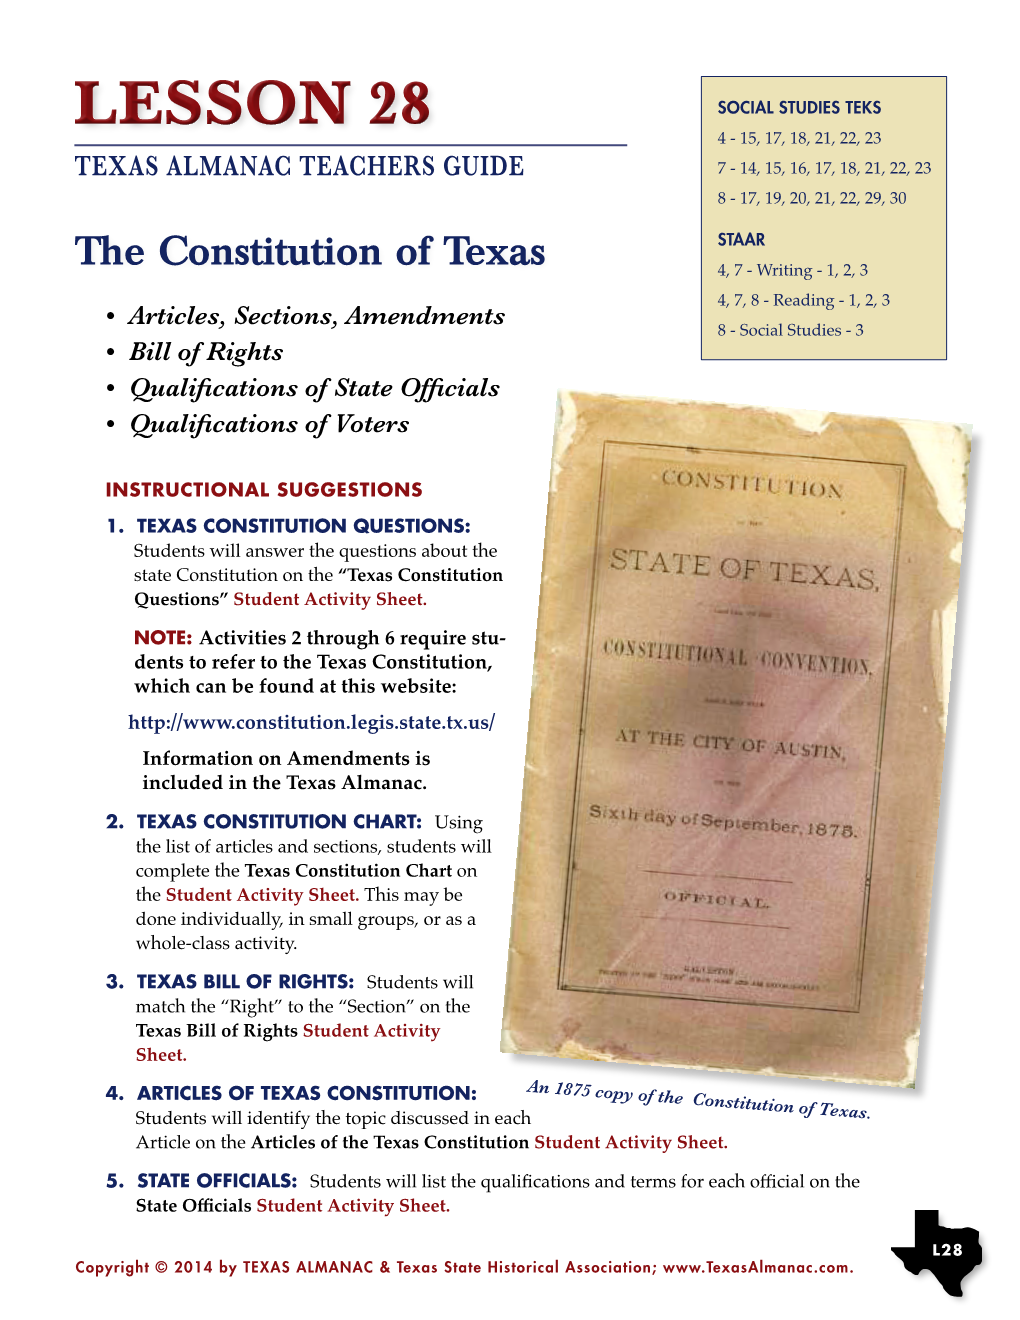 The Constitution of Texas